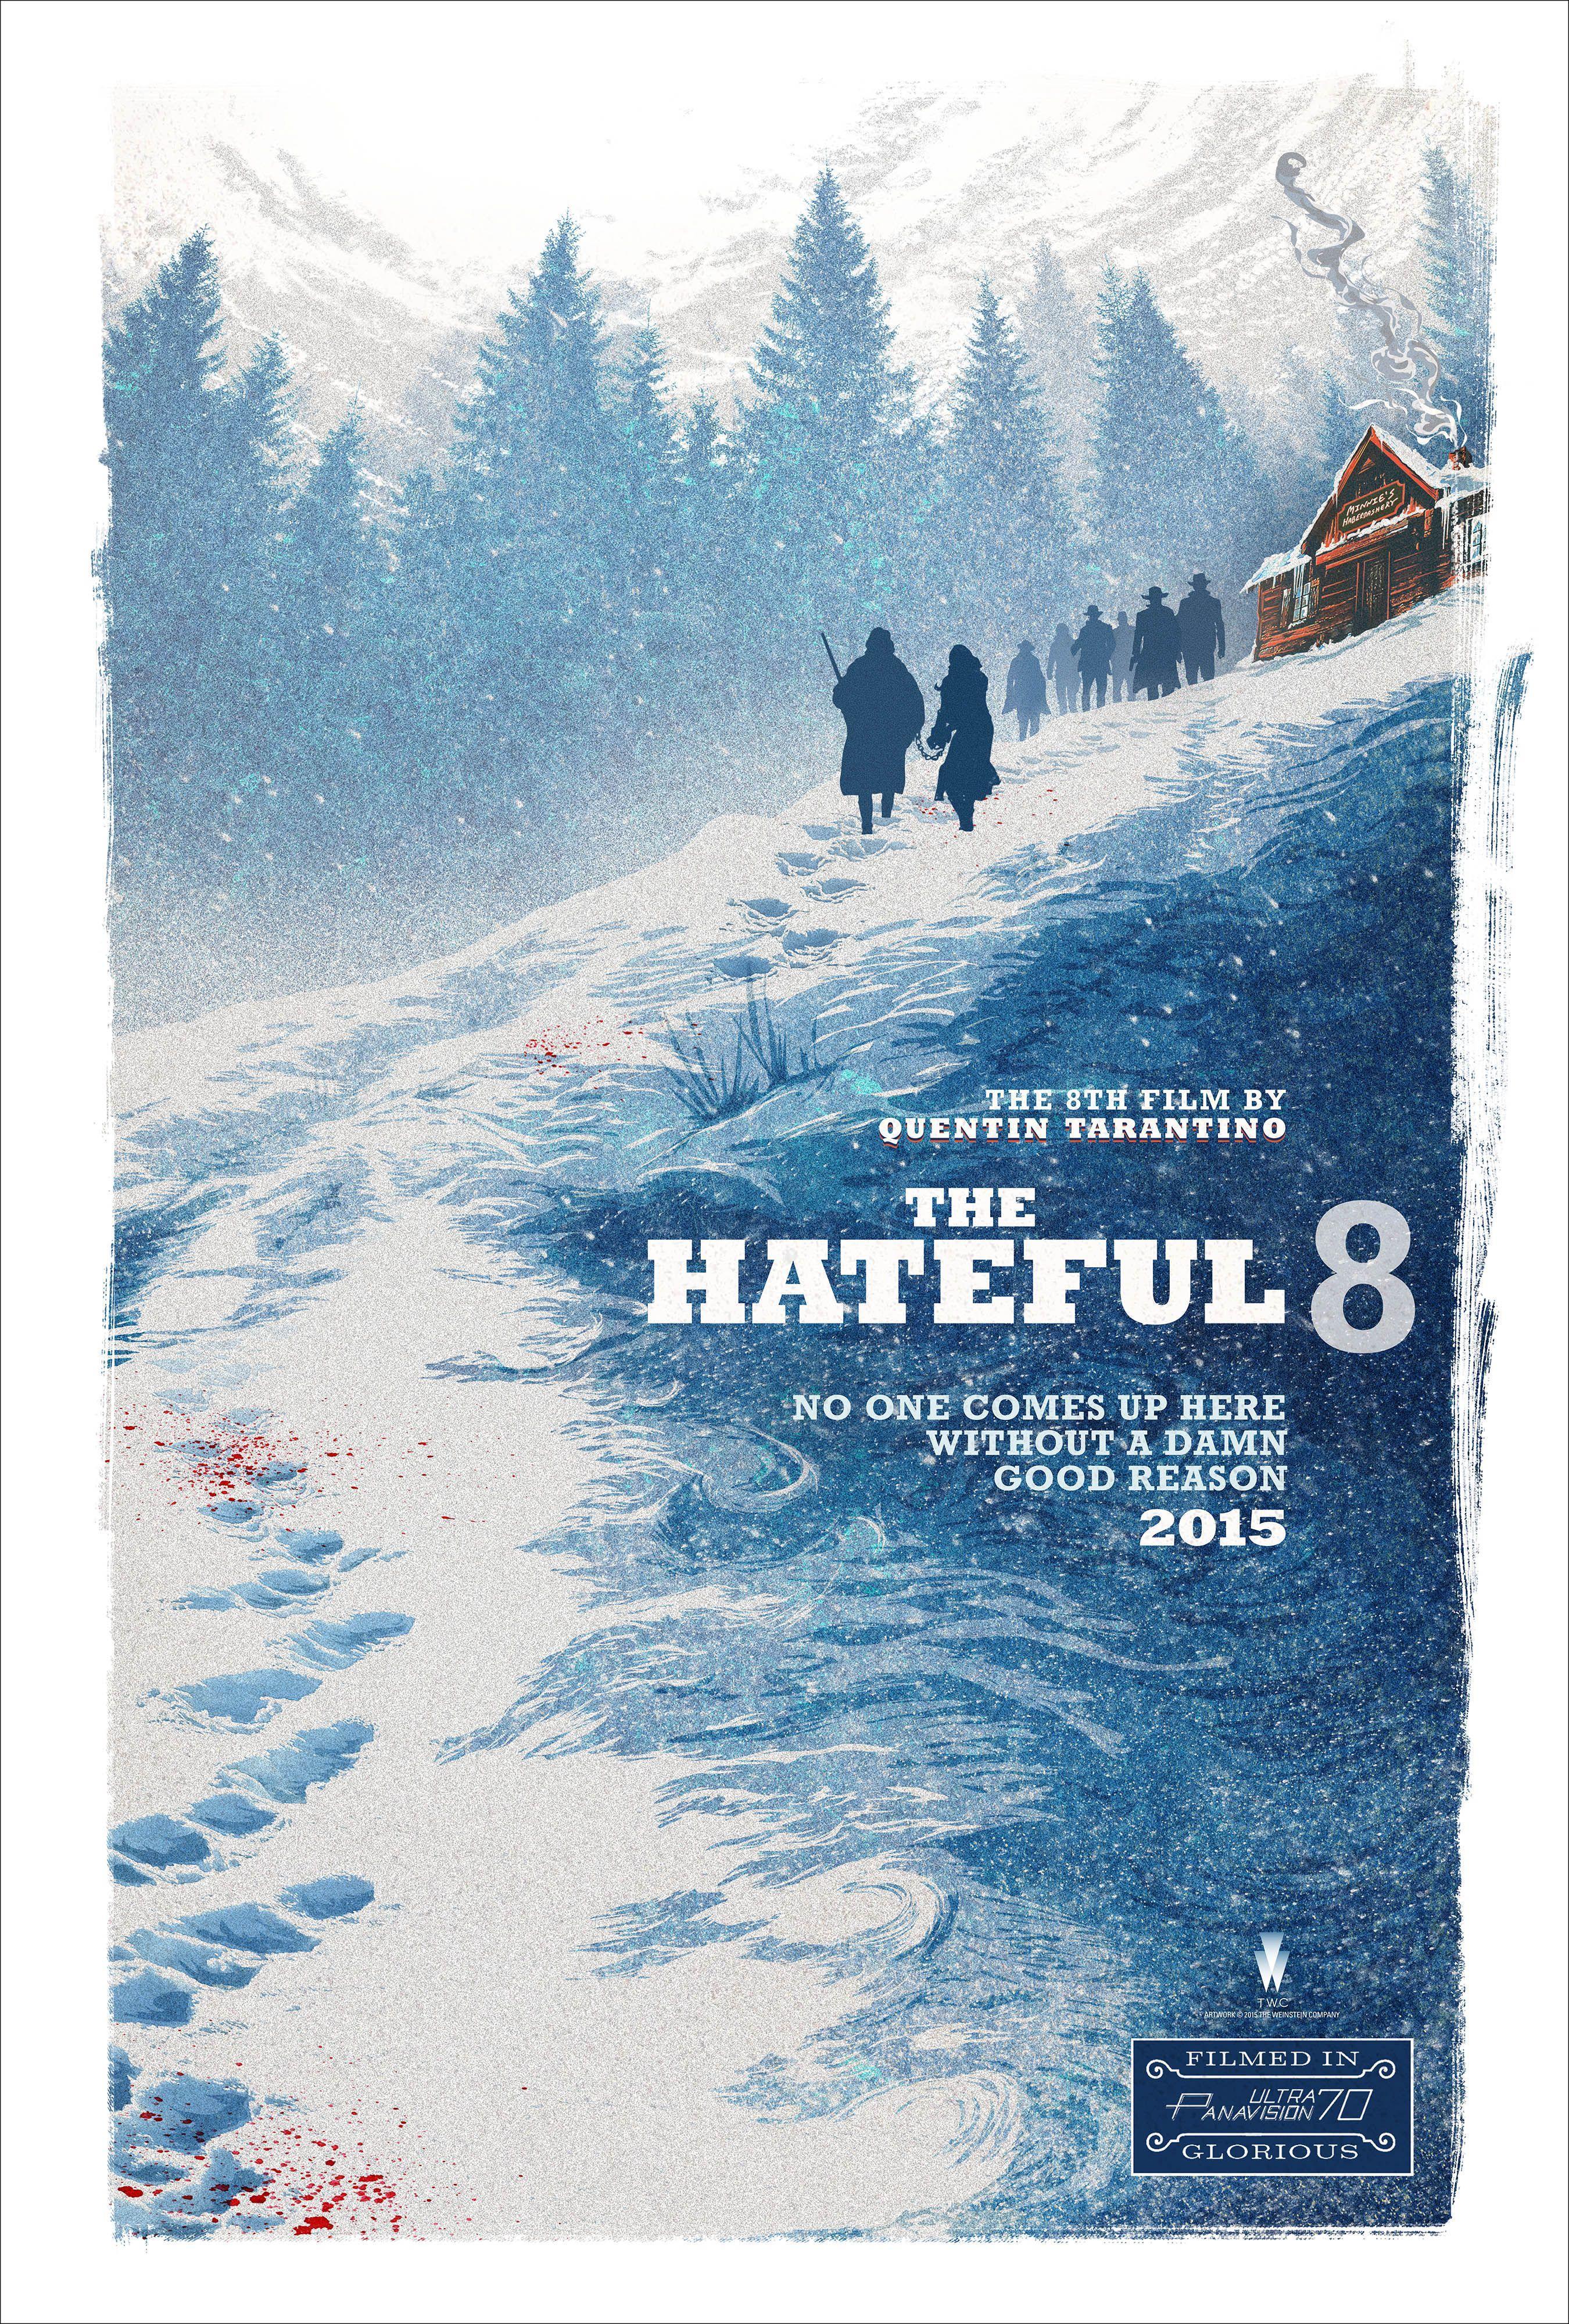 The Hateful Eight poster revealed at Comic Con